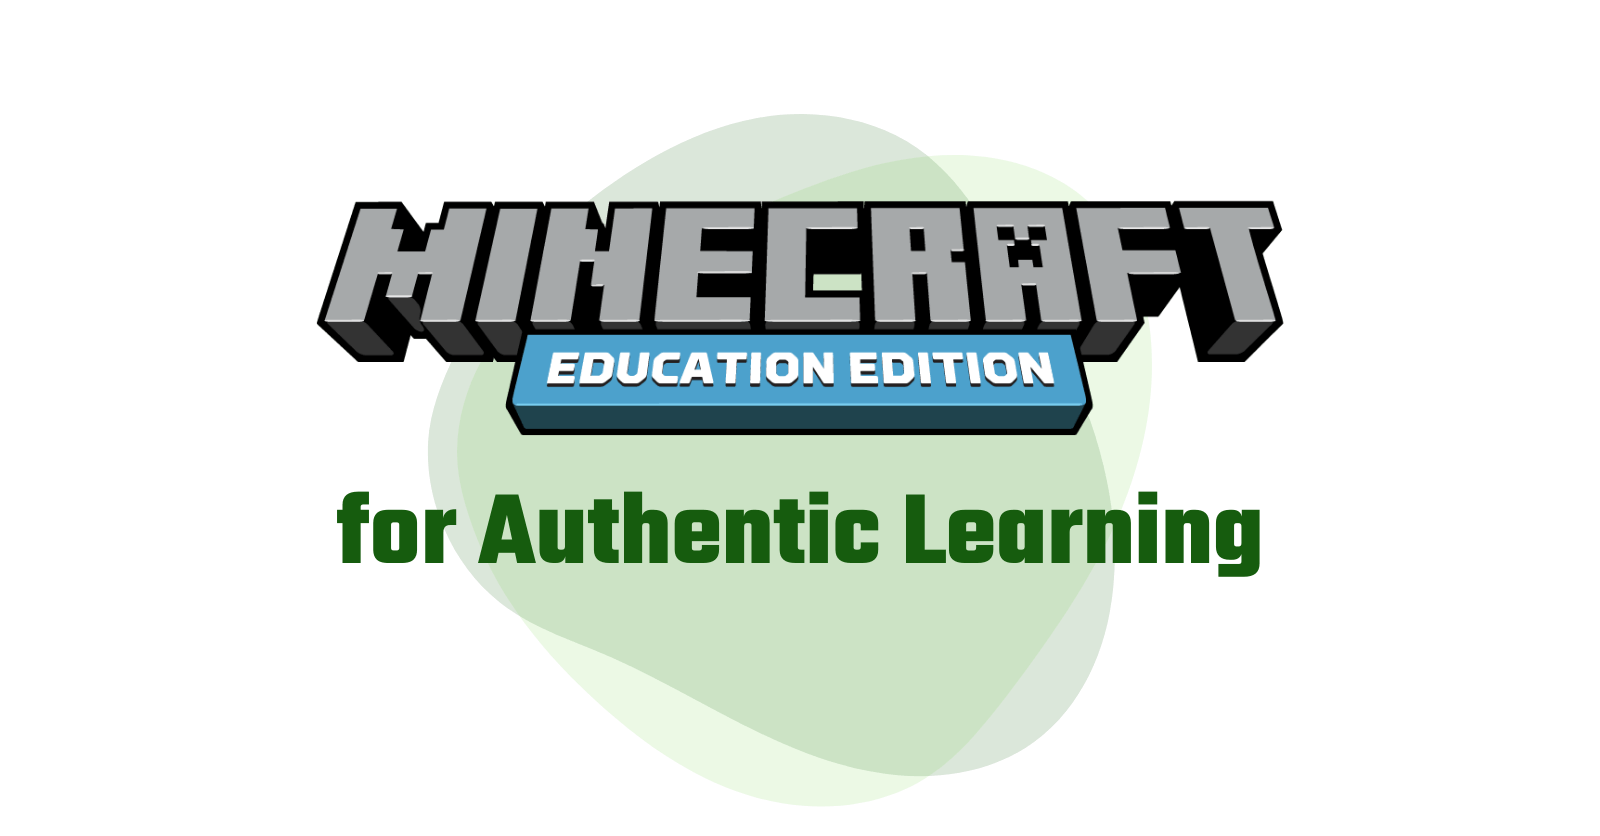 Minecraft for Authentic Learning 